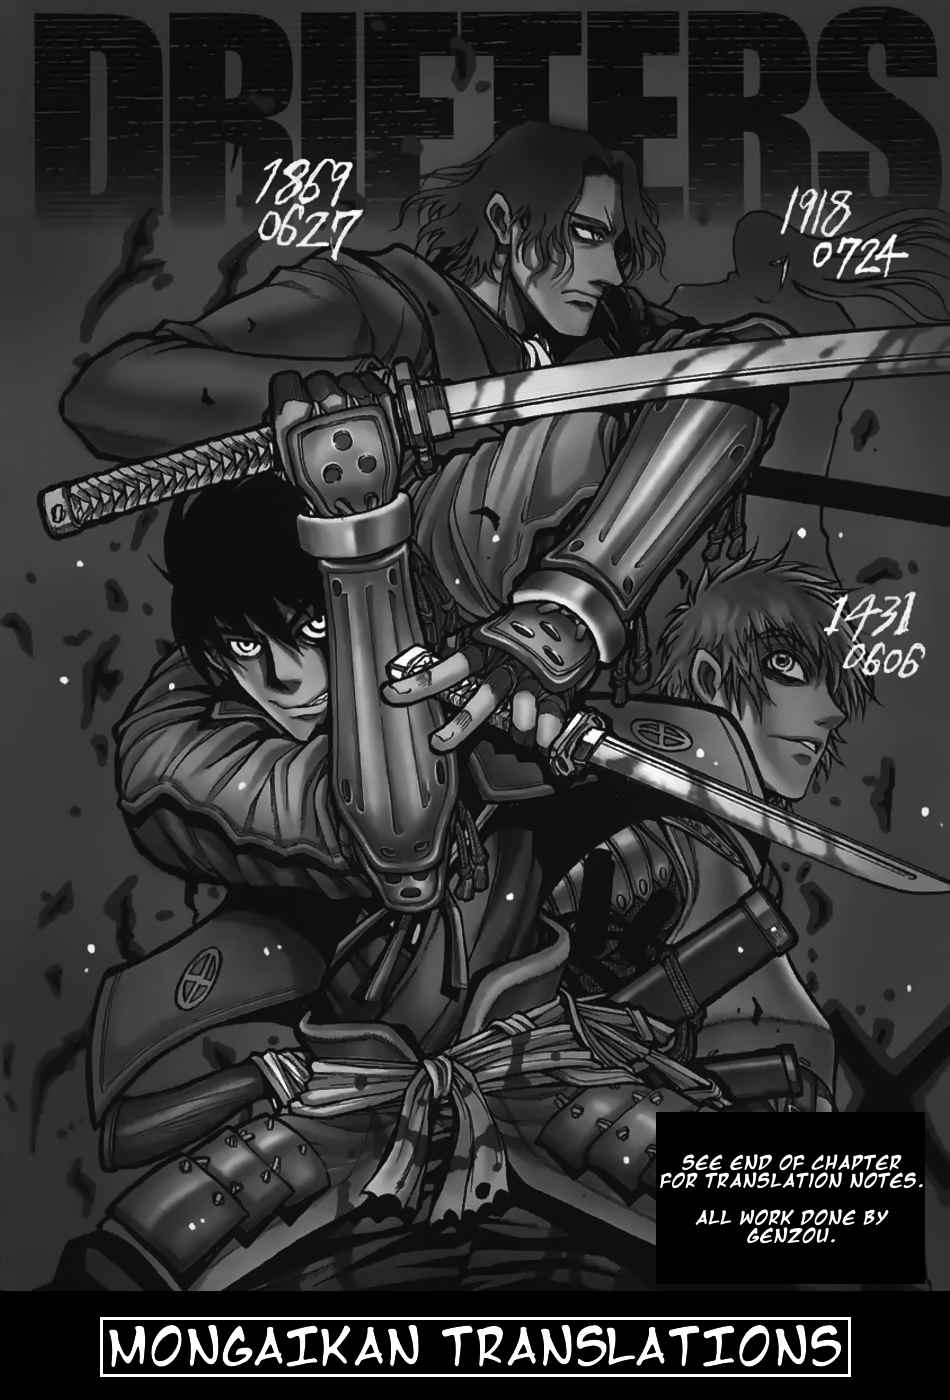 Drifters Ch. 76 After, In the Dark